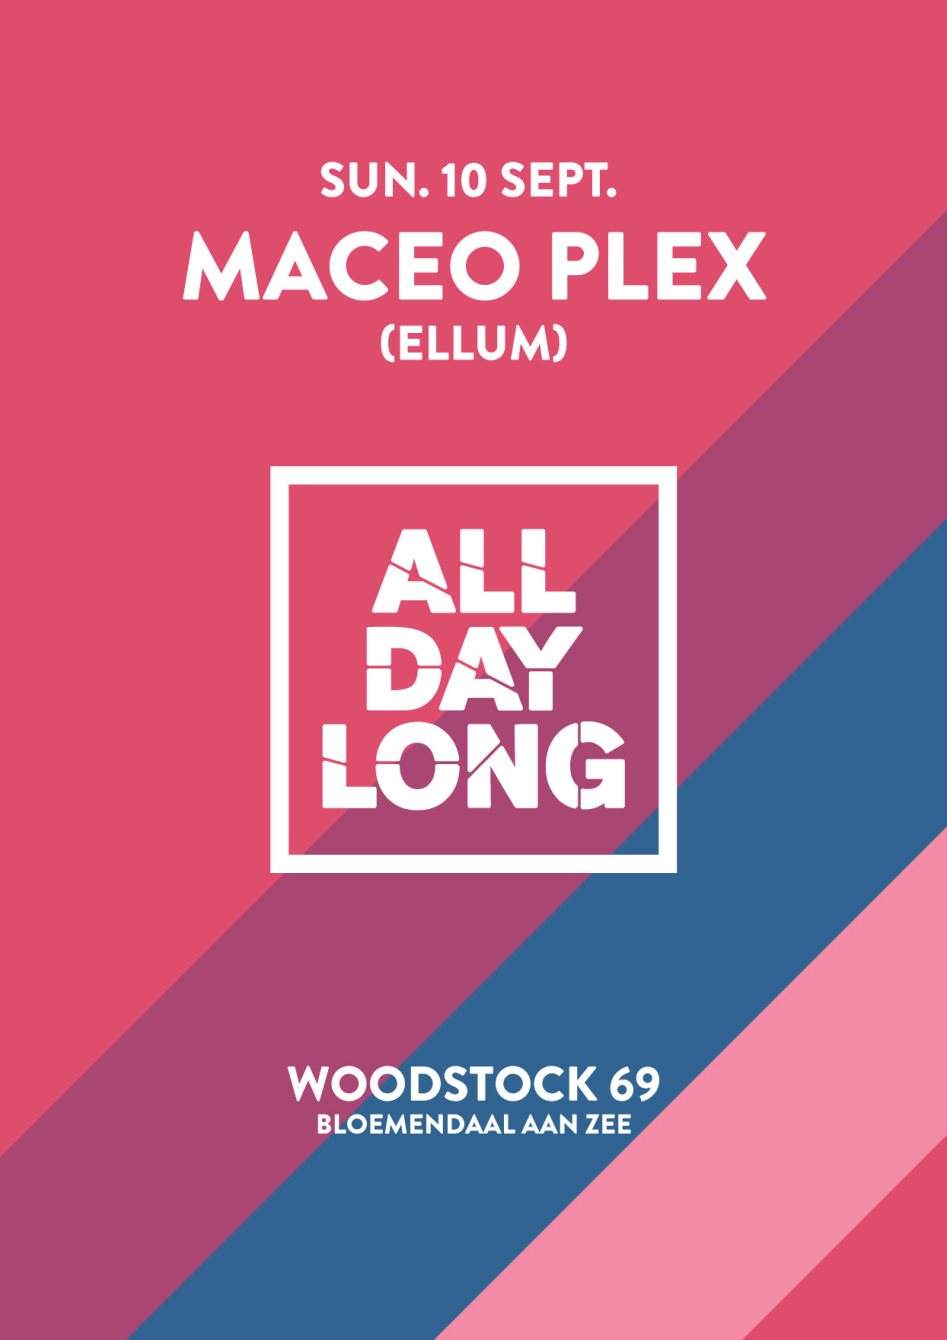 All Day Long with Maceo Plex - Página frontal